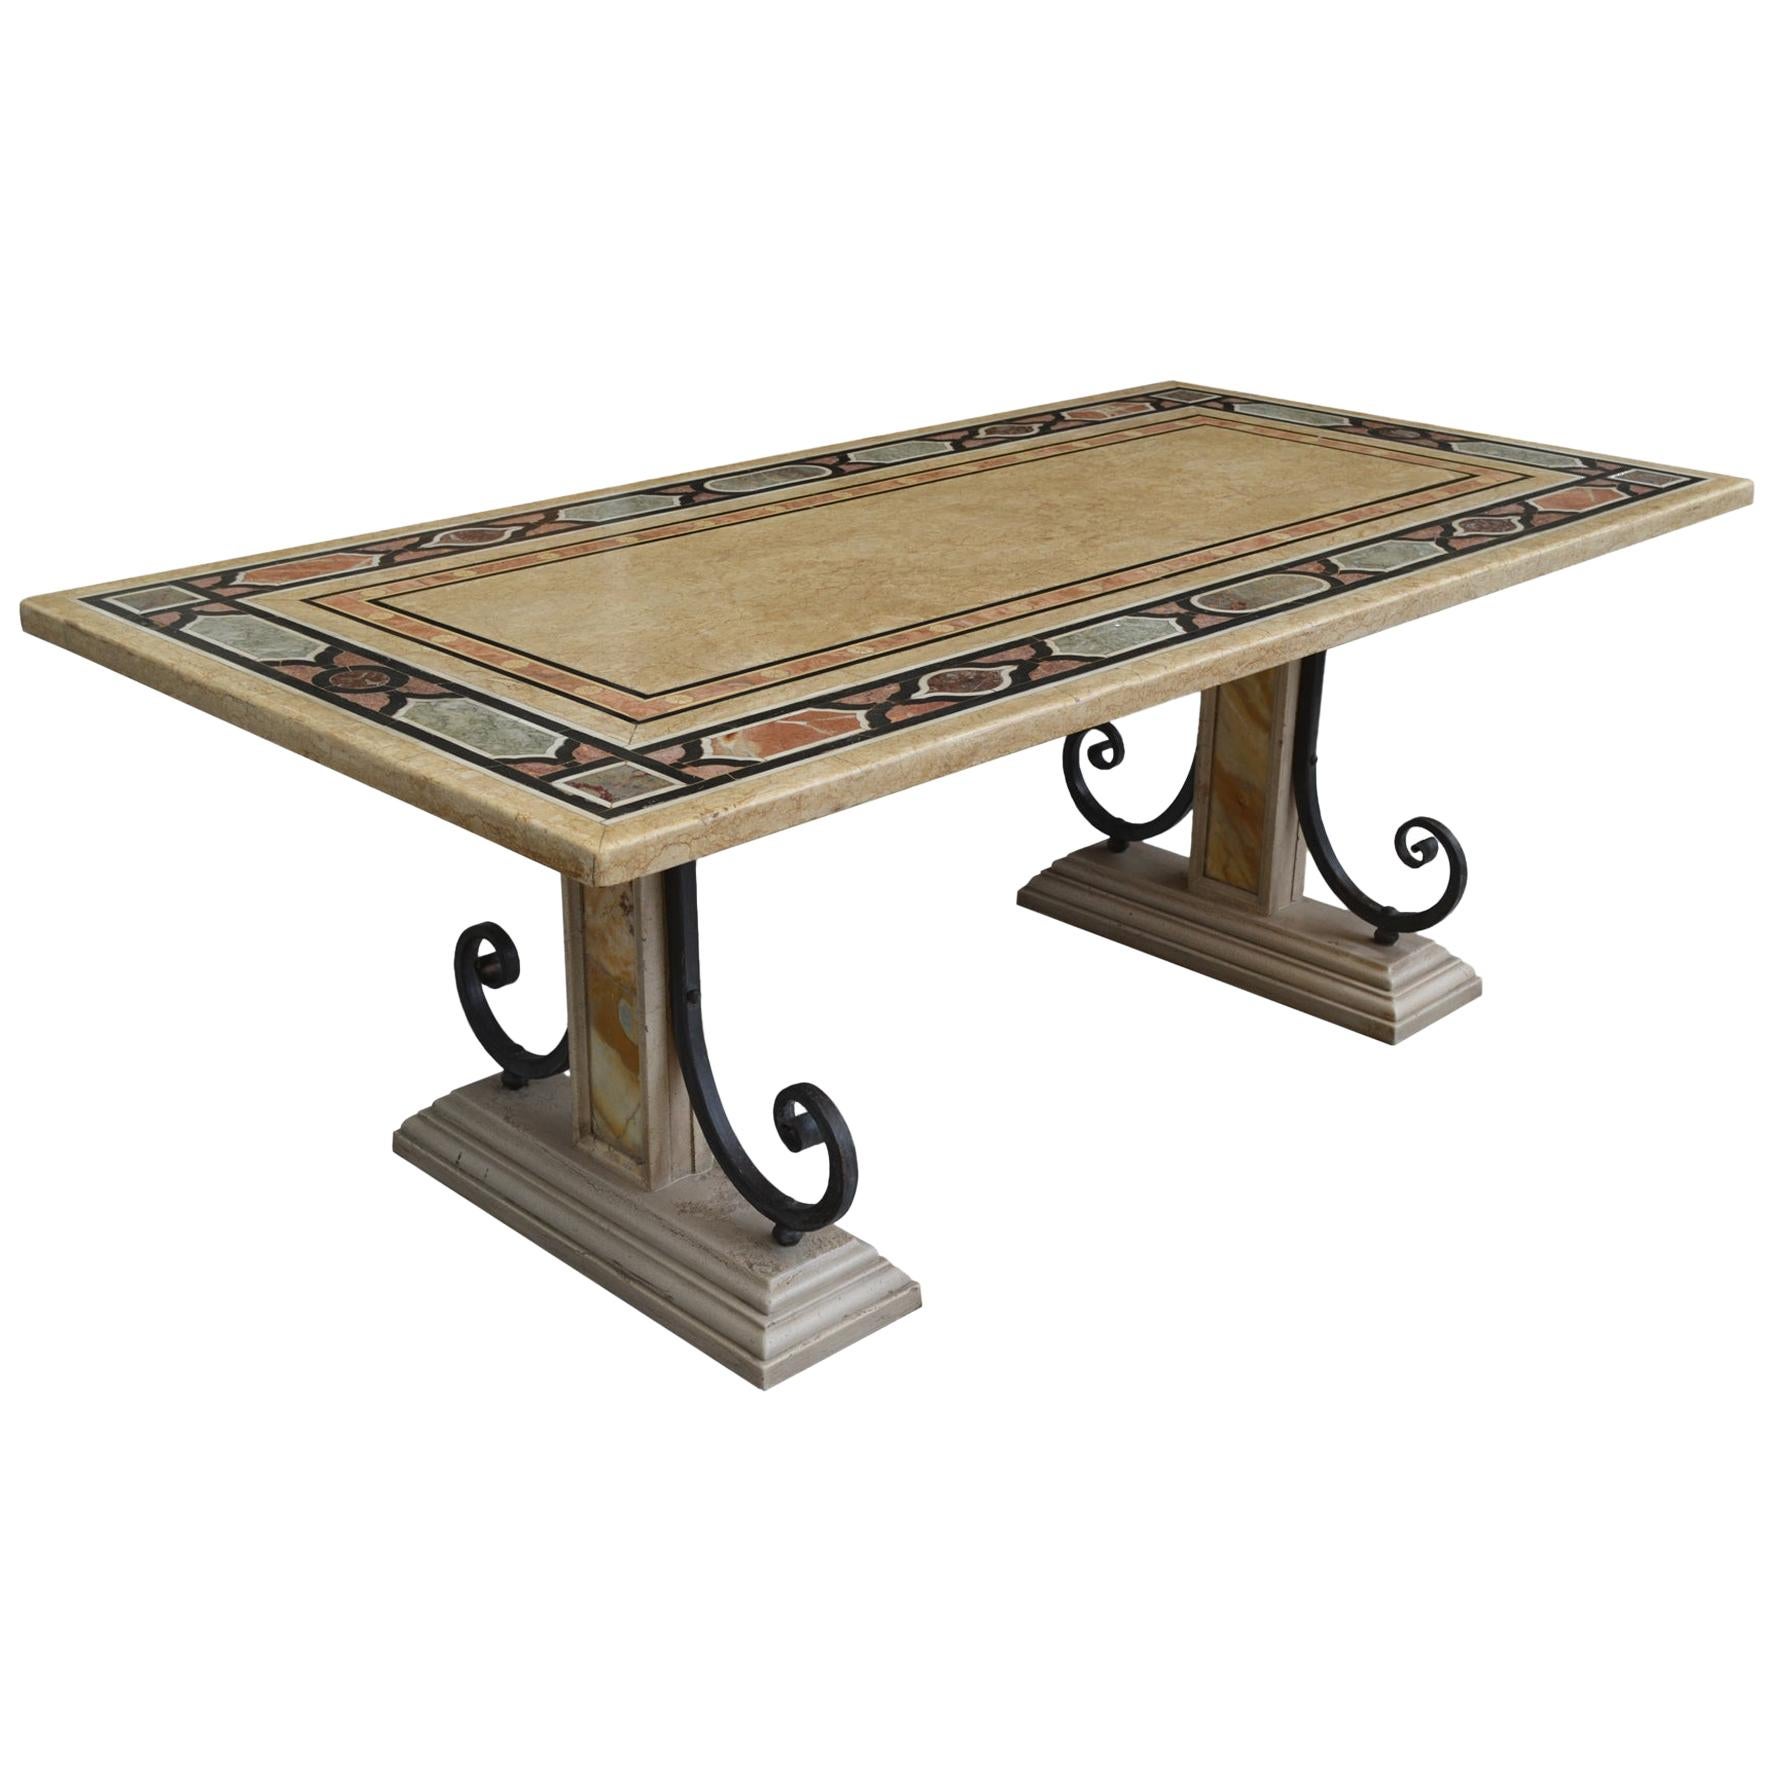 Rectangular Dining Table Inalied Marbles Wrought Iron Details Antique Finishing